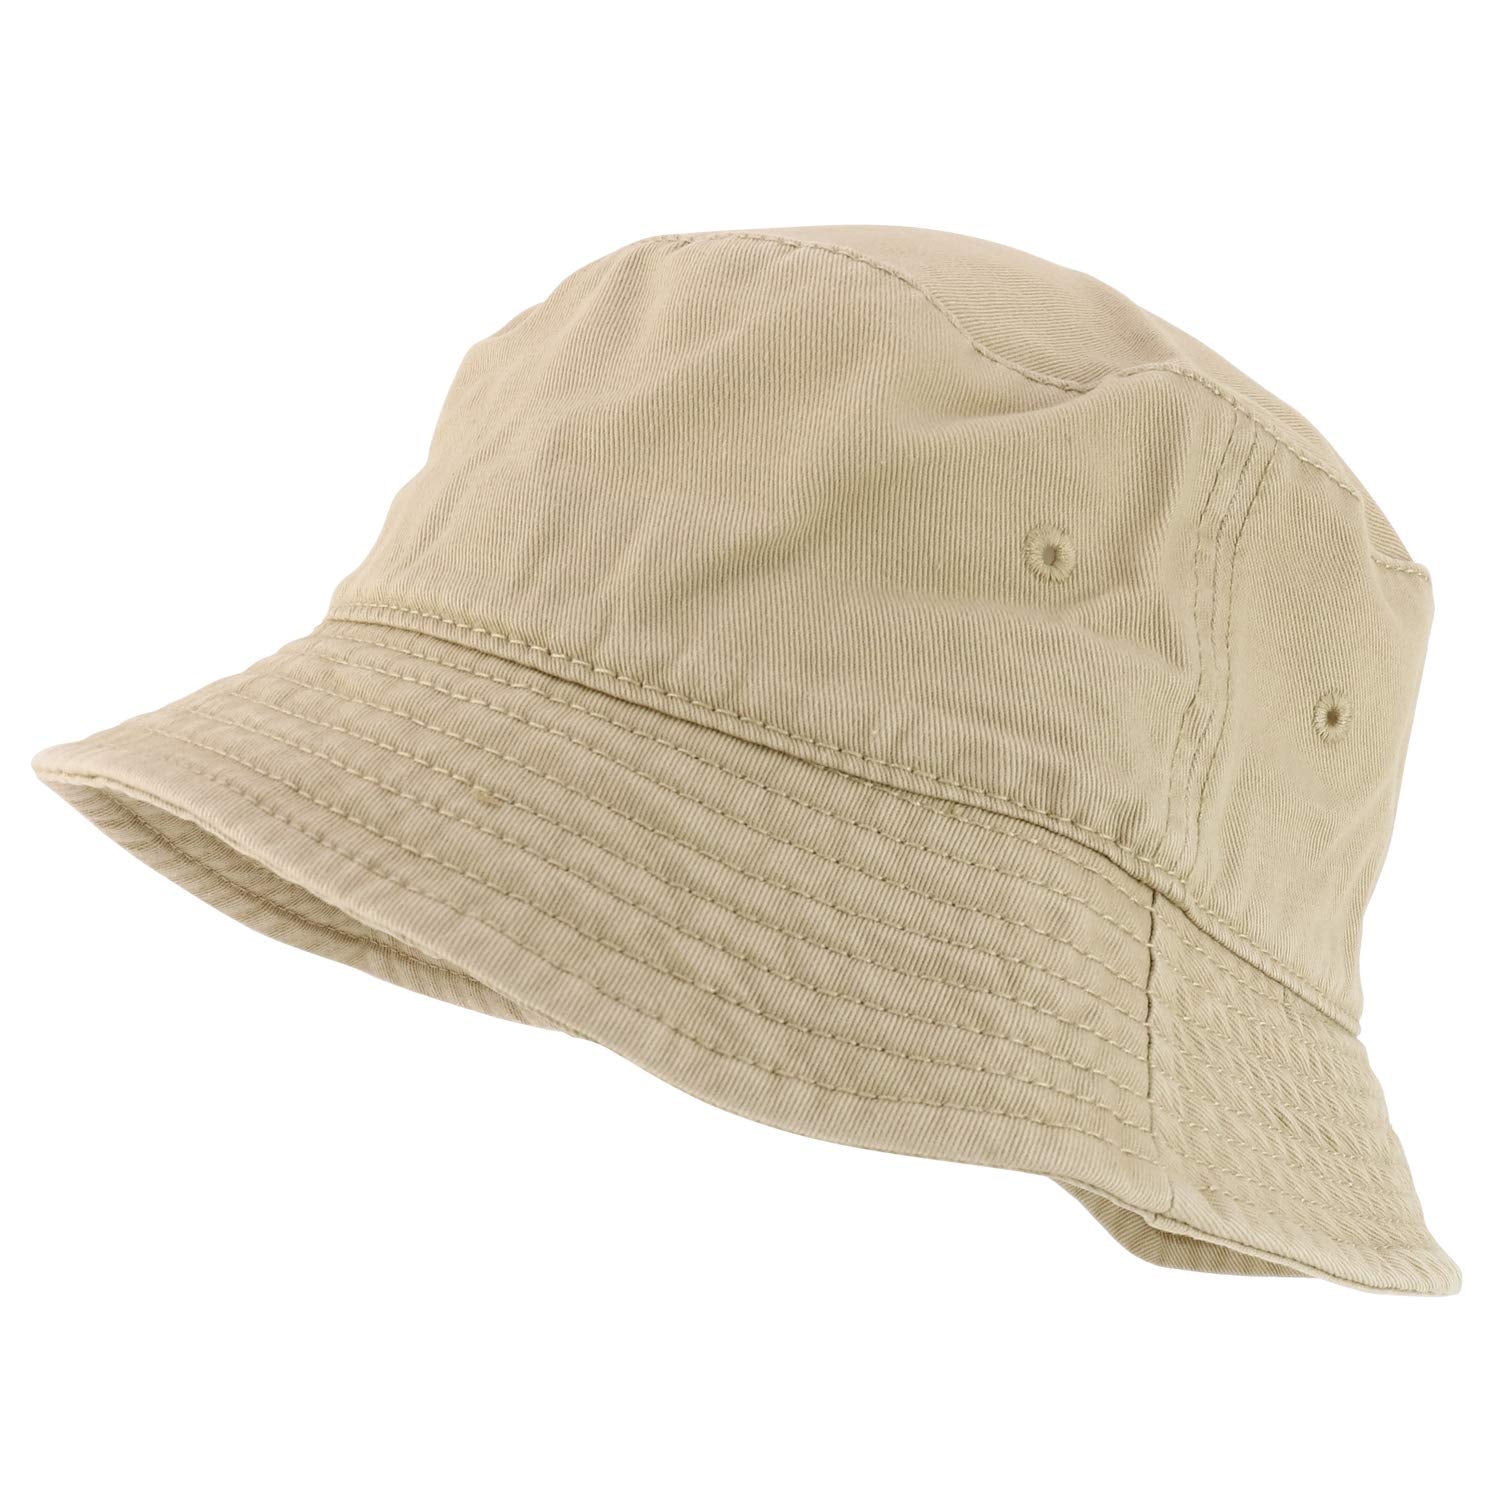 Armycrew Garment Washed Cotton Twill Casual Bucket Hat - S/M to 2XL/3XL